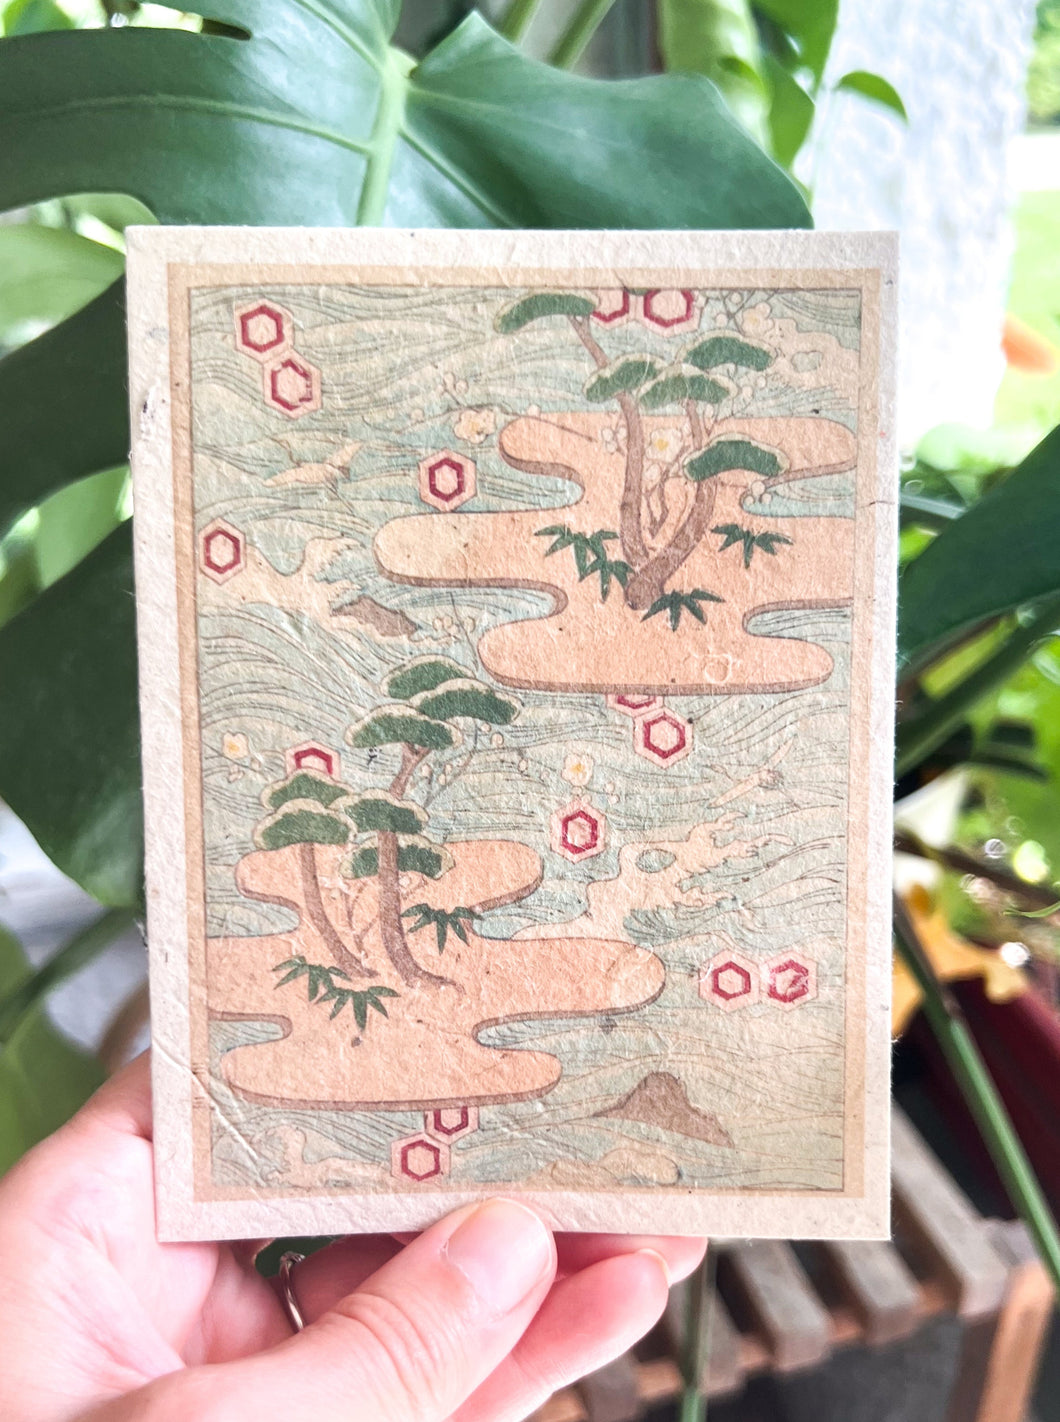 Japanese Plantable Seed Card || Zero Waste || Supports Women || Eco-friendly || J52